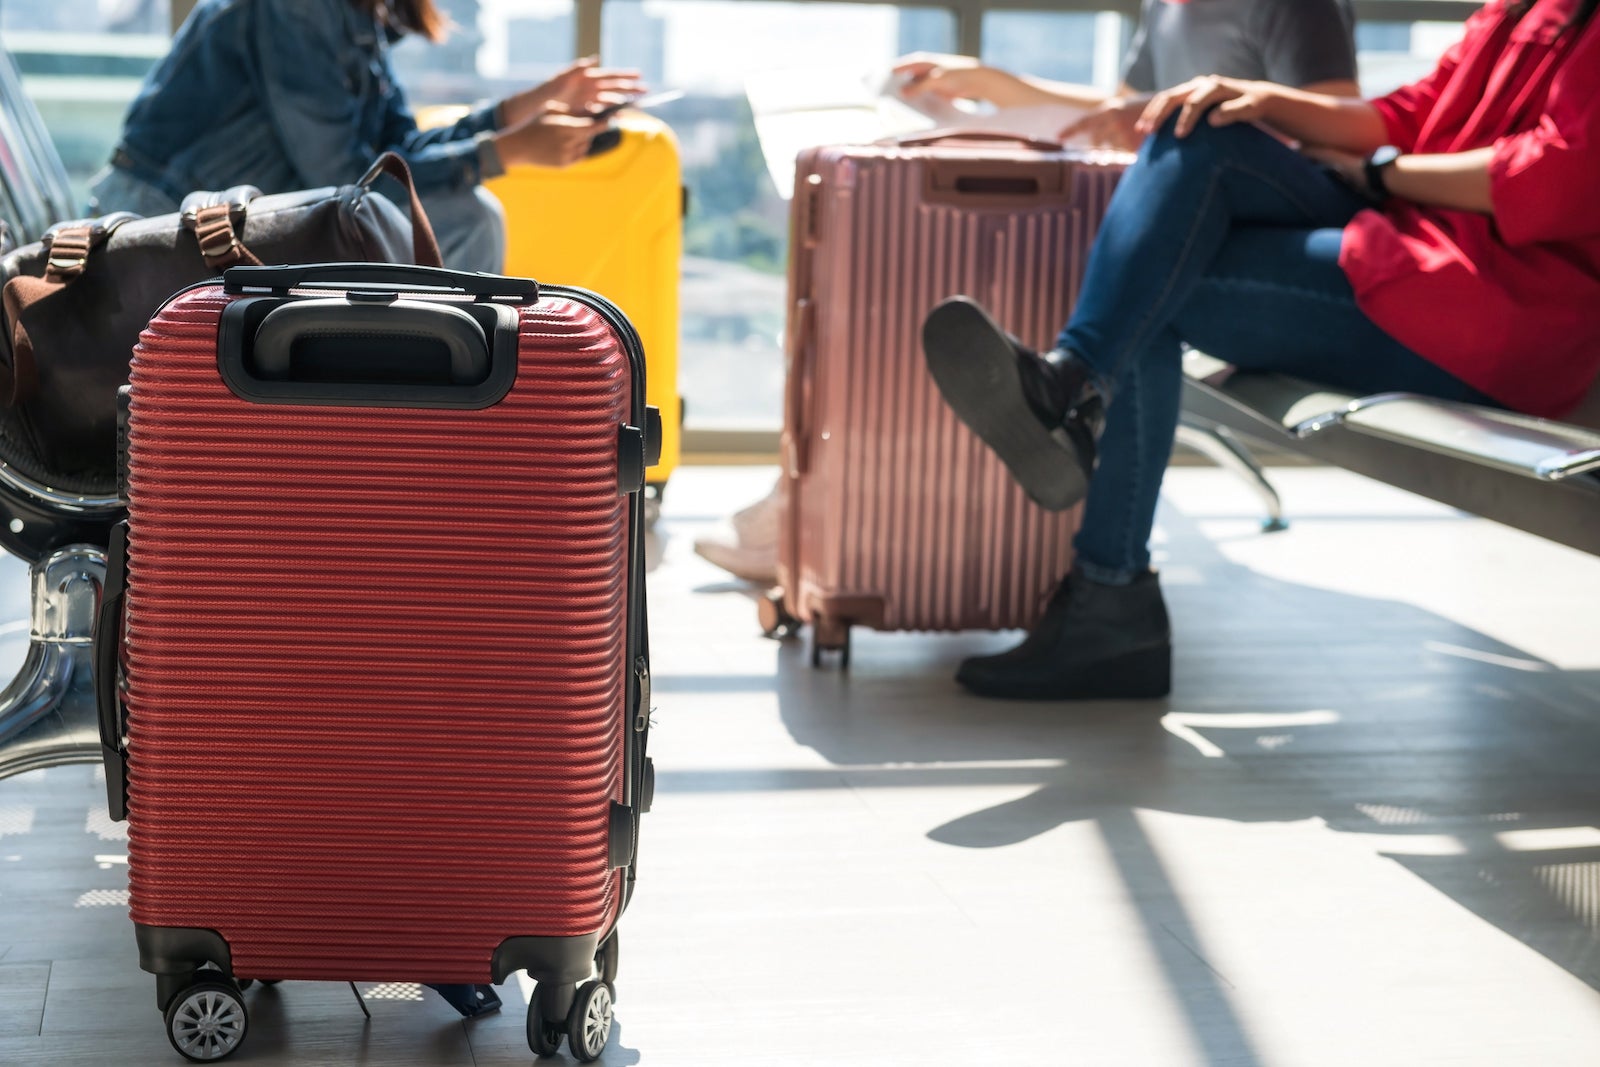 7 steps to take when an airline loses your luggage - The Points Guy